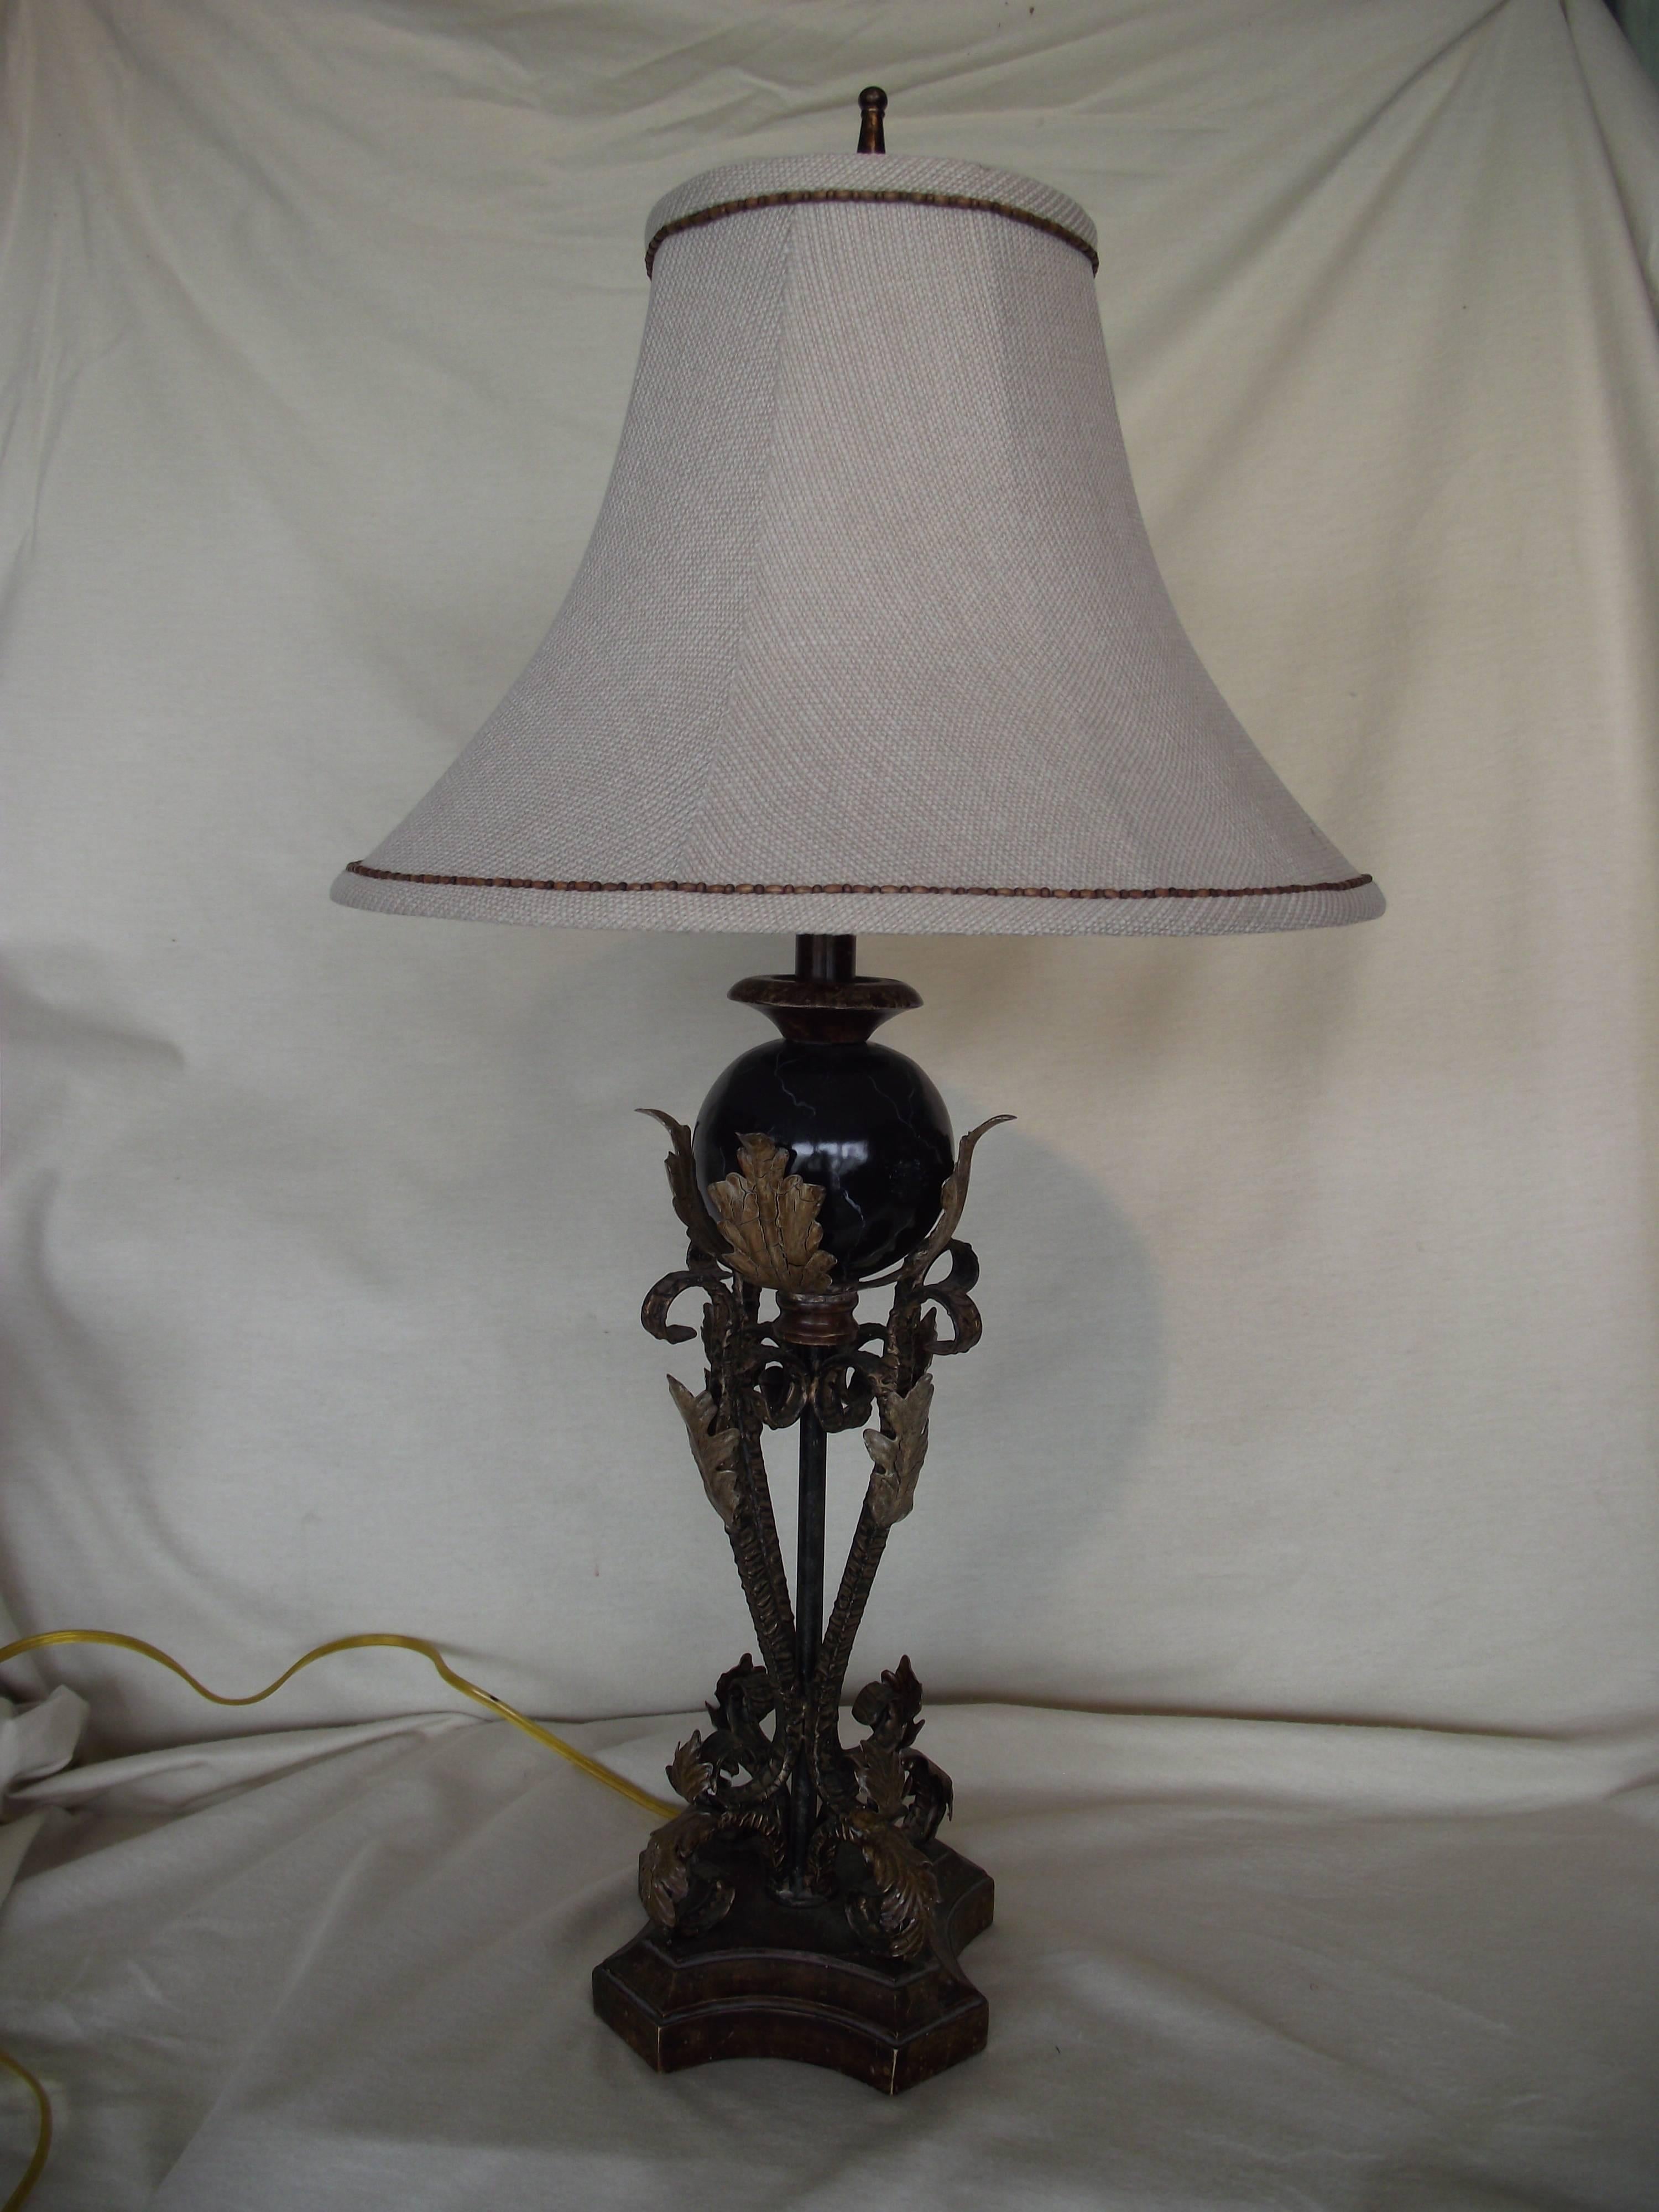 This beautiful table lamp is constructed of metal with an aged leather brown and gold leaf finish.

It features a black faux marble ball surrounded by gold leaf acanthus leaves.

It measures 33